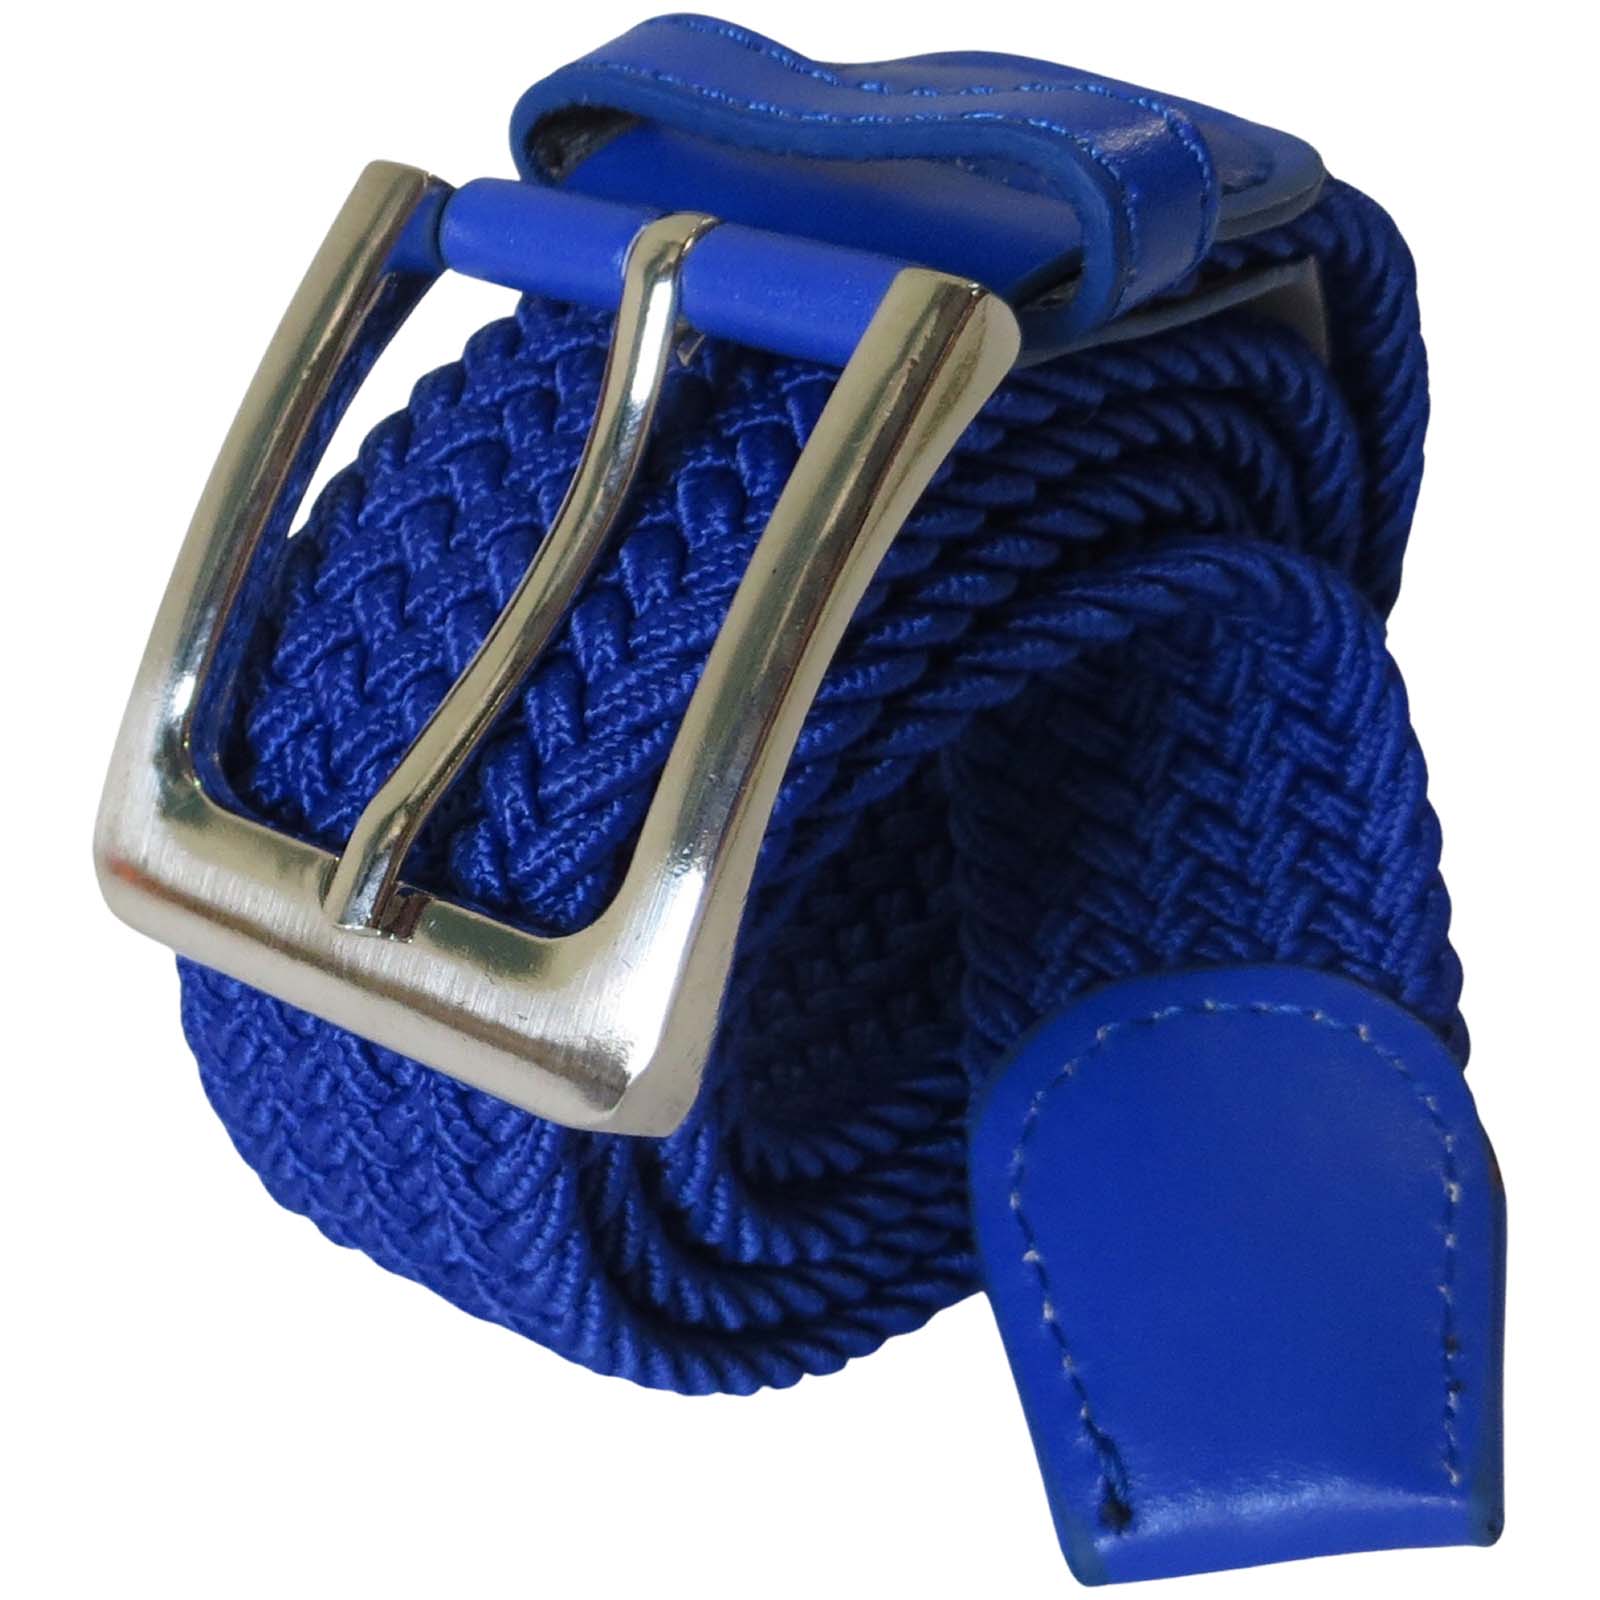 All Products Blue Golf Belts.